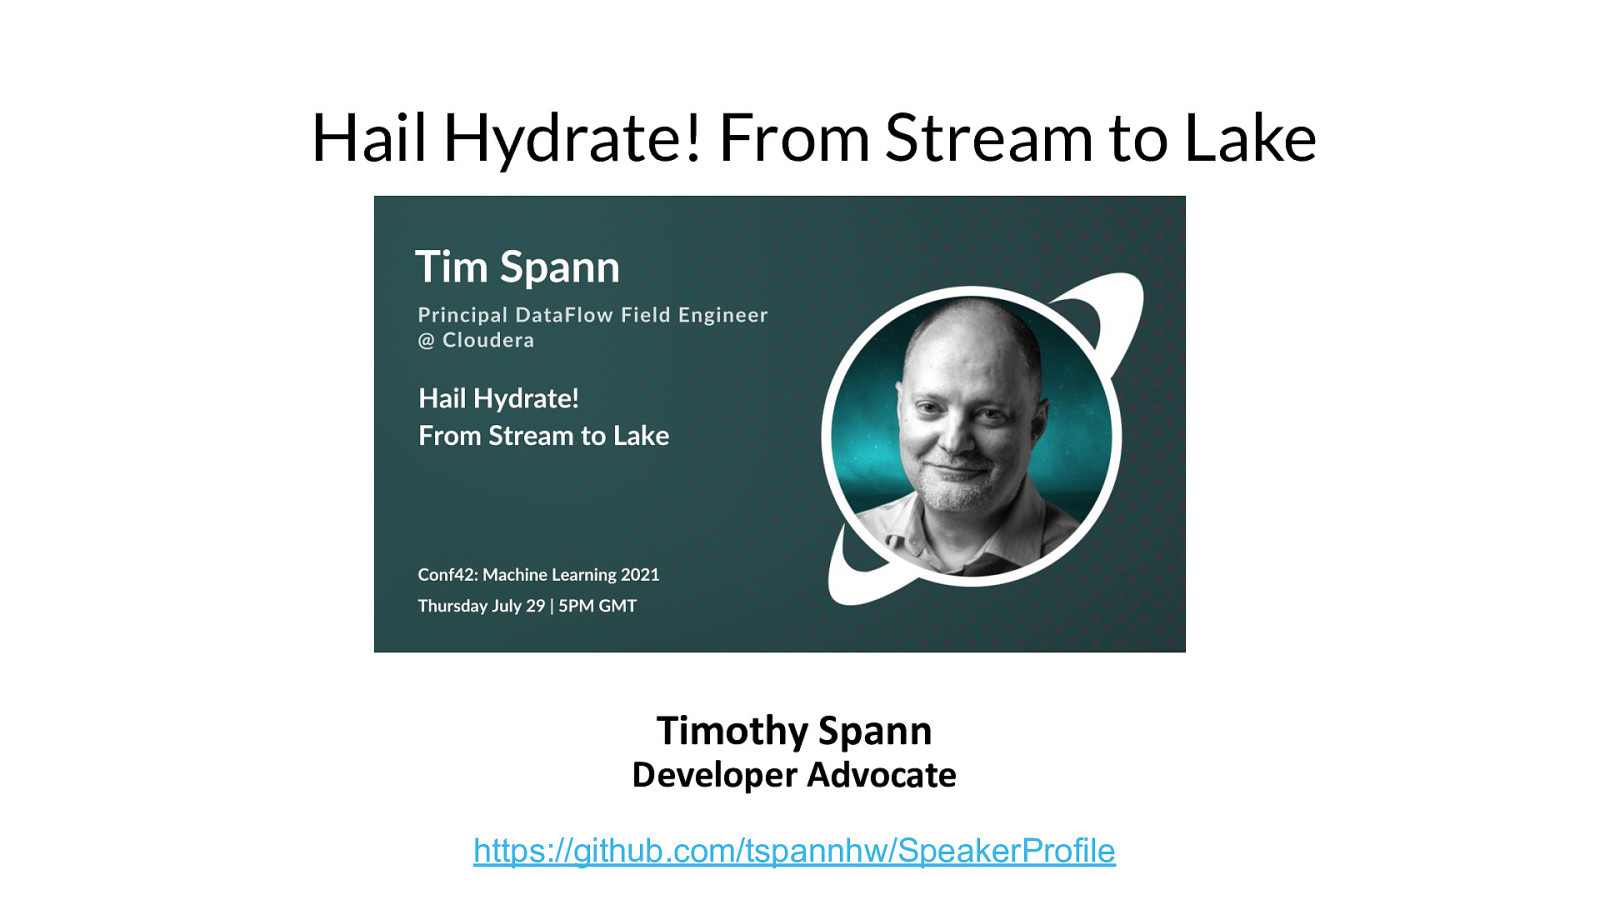 Hail Hydrate! From Stream to Lake